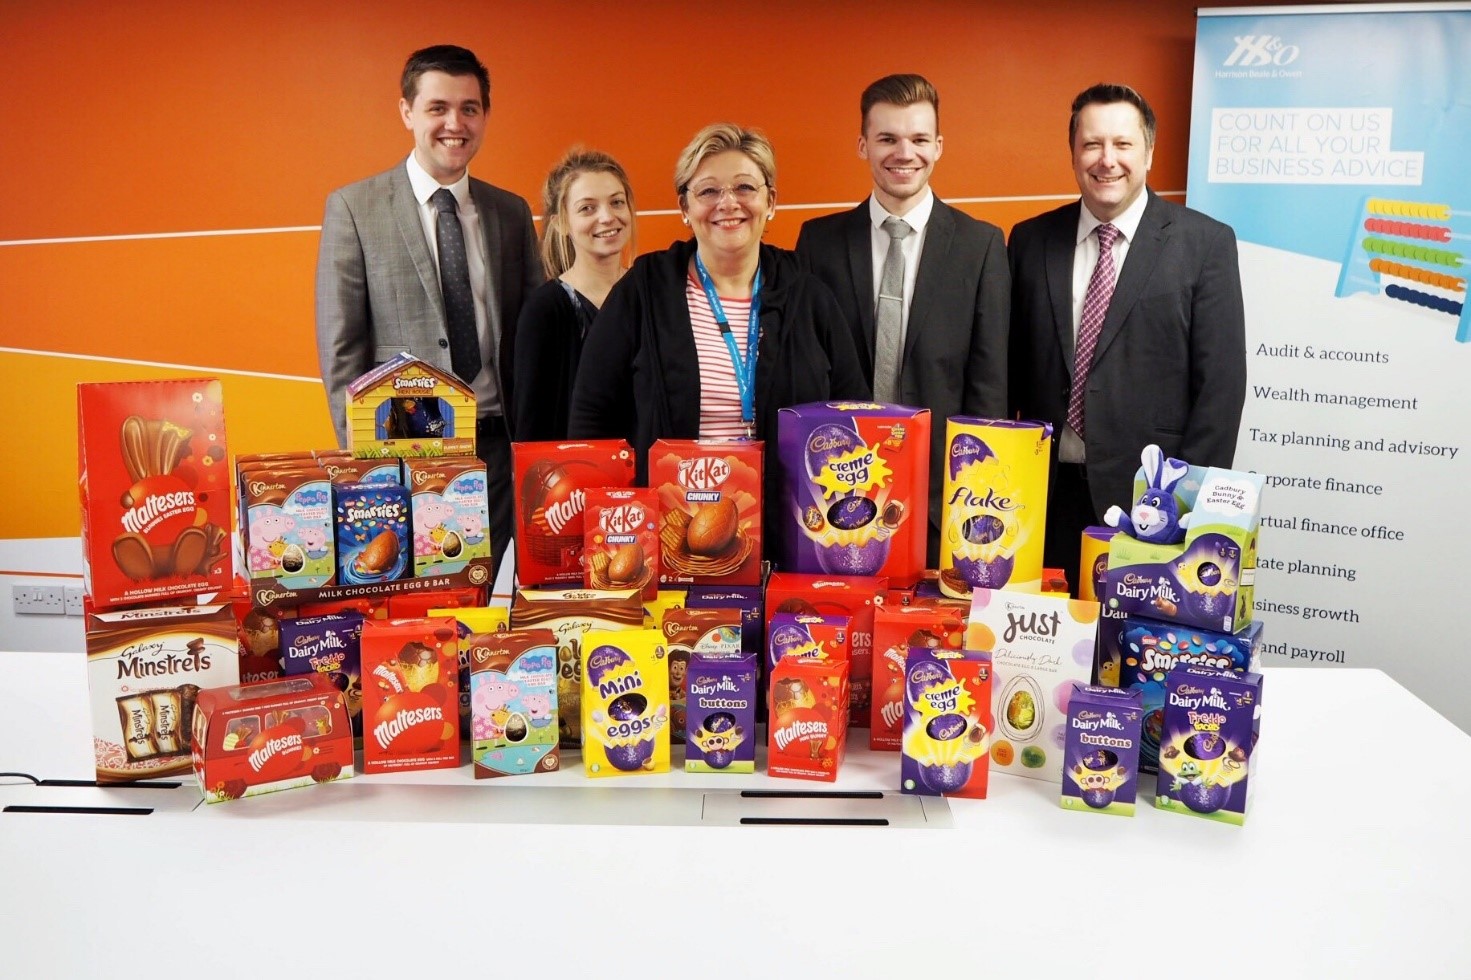 Harrison Beale & Owen donates over one hundred Easter Eggs to UHCW charity